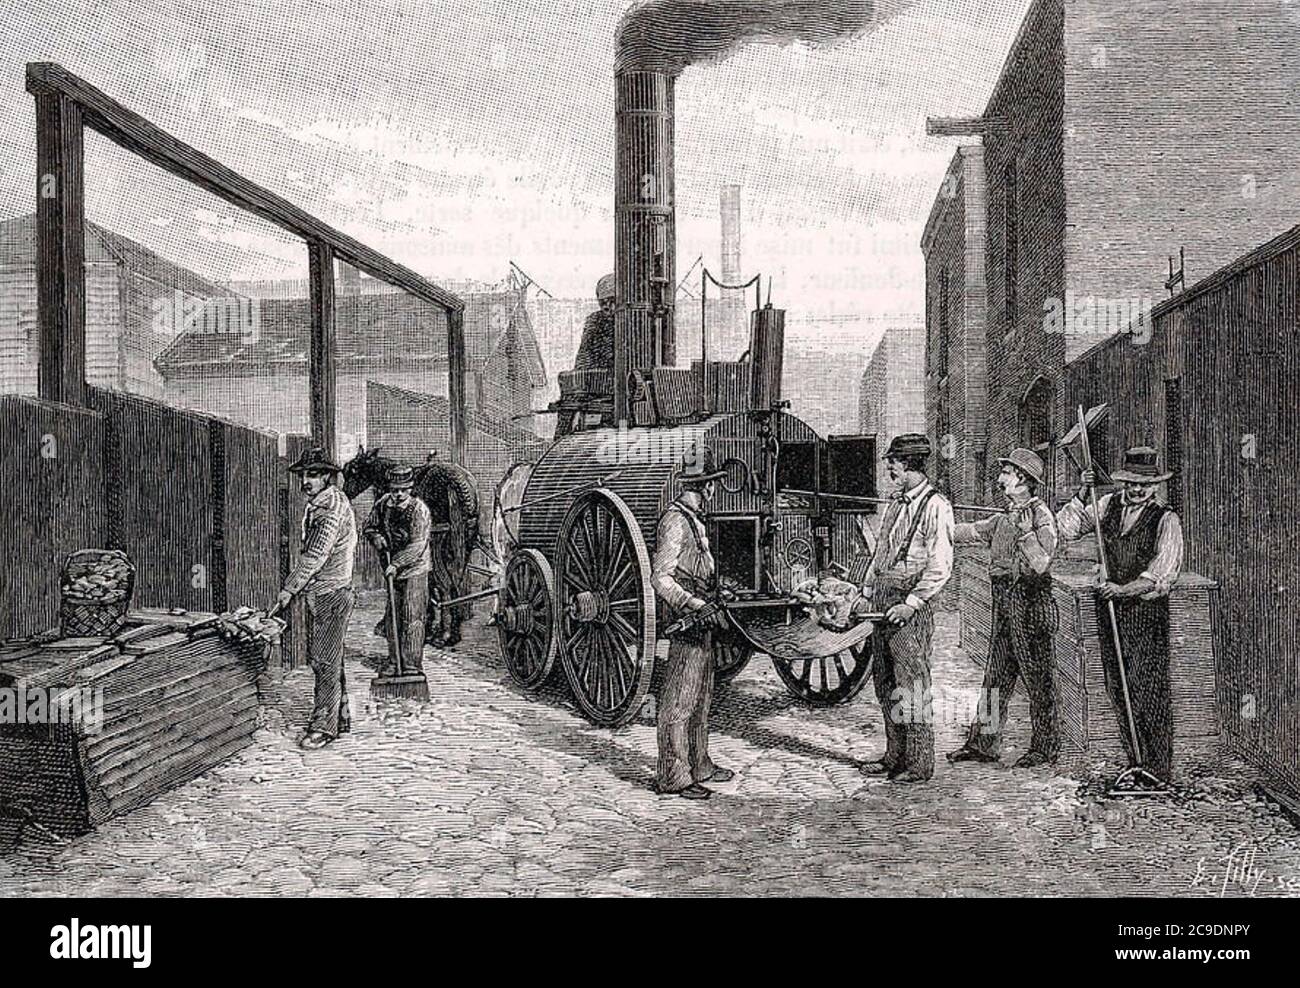 WASTE MANAGEMENT Chicago in n1849 using a portable steam boiler. Stock Photo